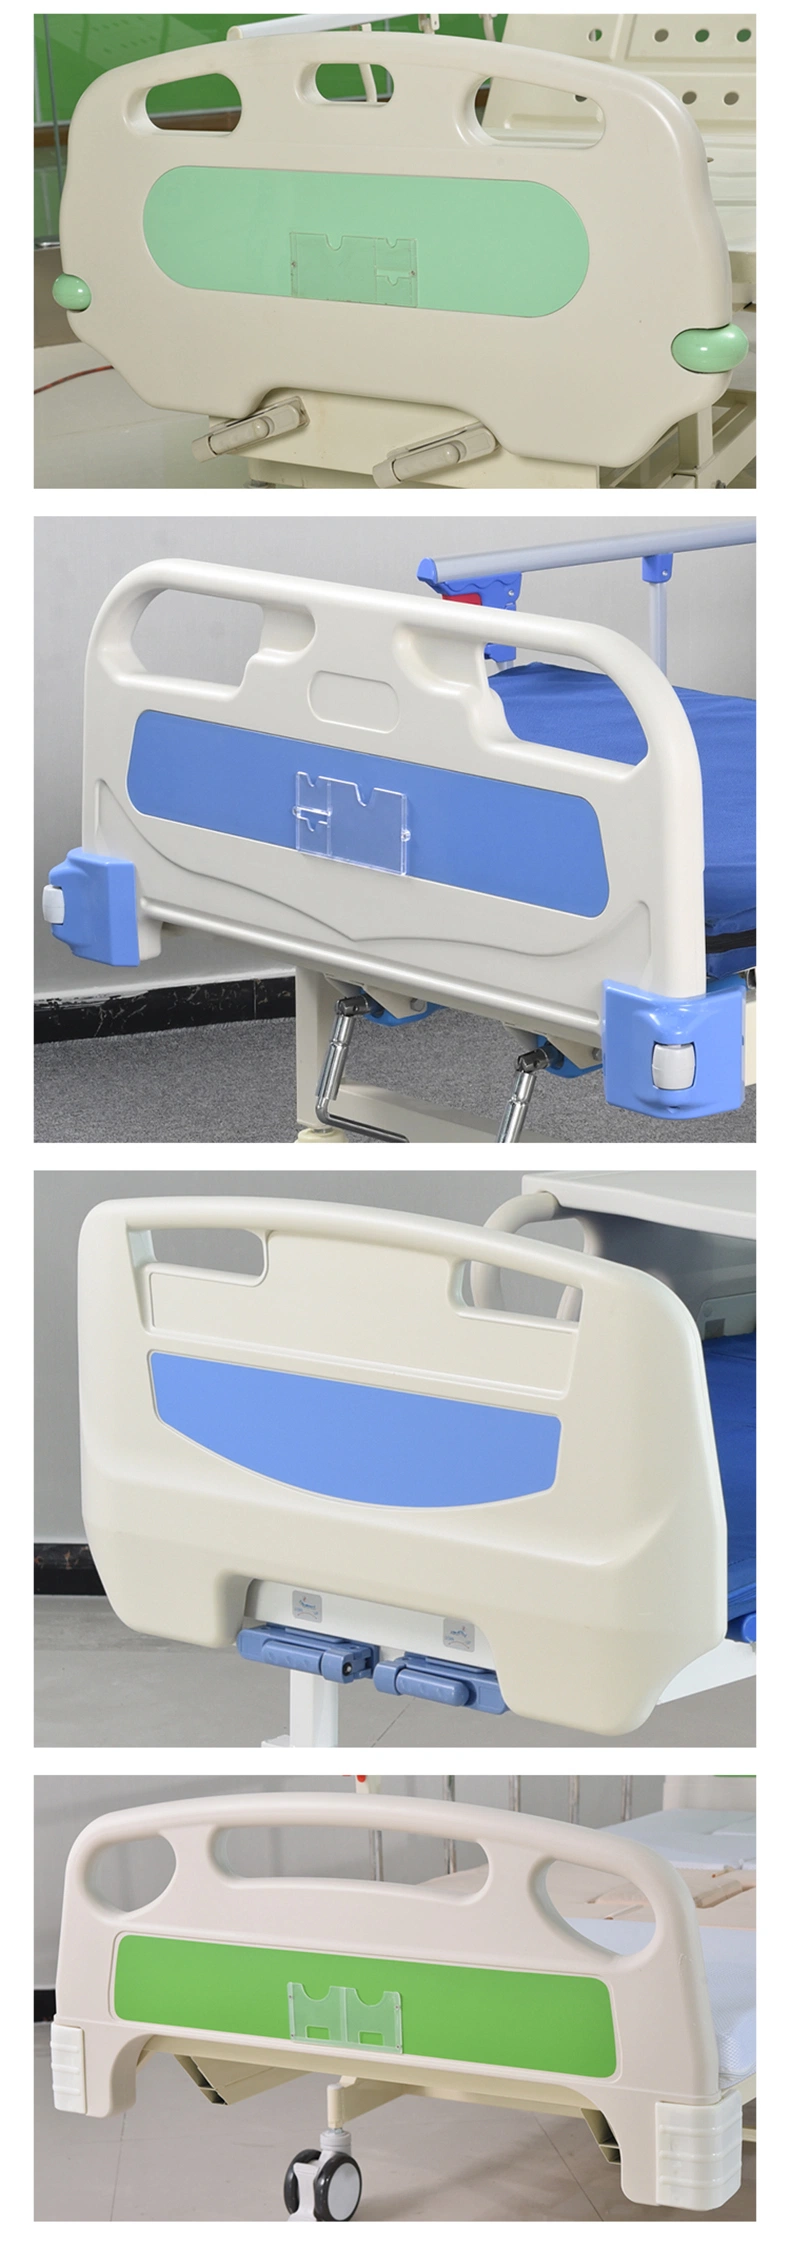 China Manufacturer Cheap Price Hospital Bed Accessories Patient Bed Headboard Panel